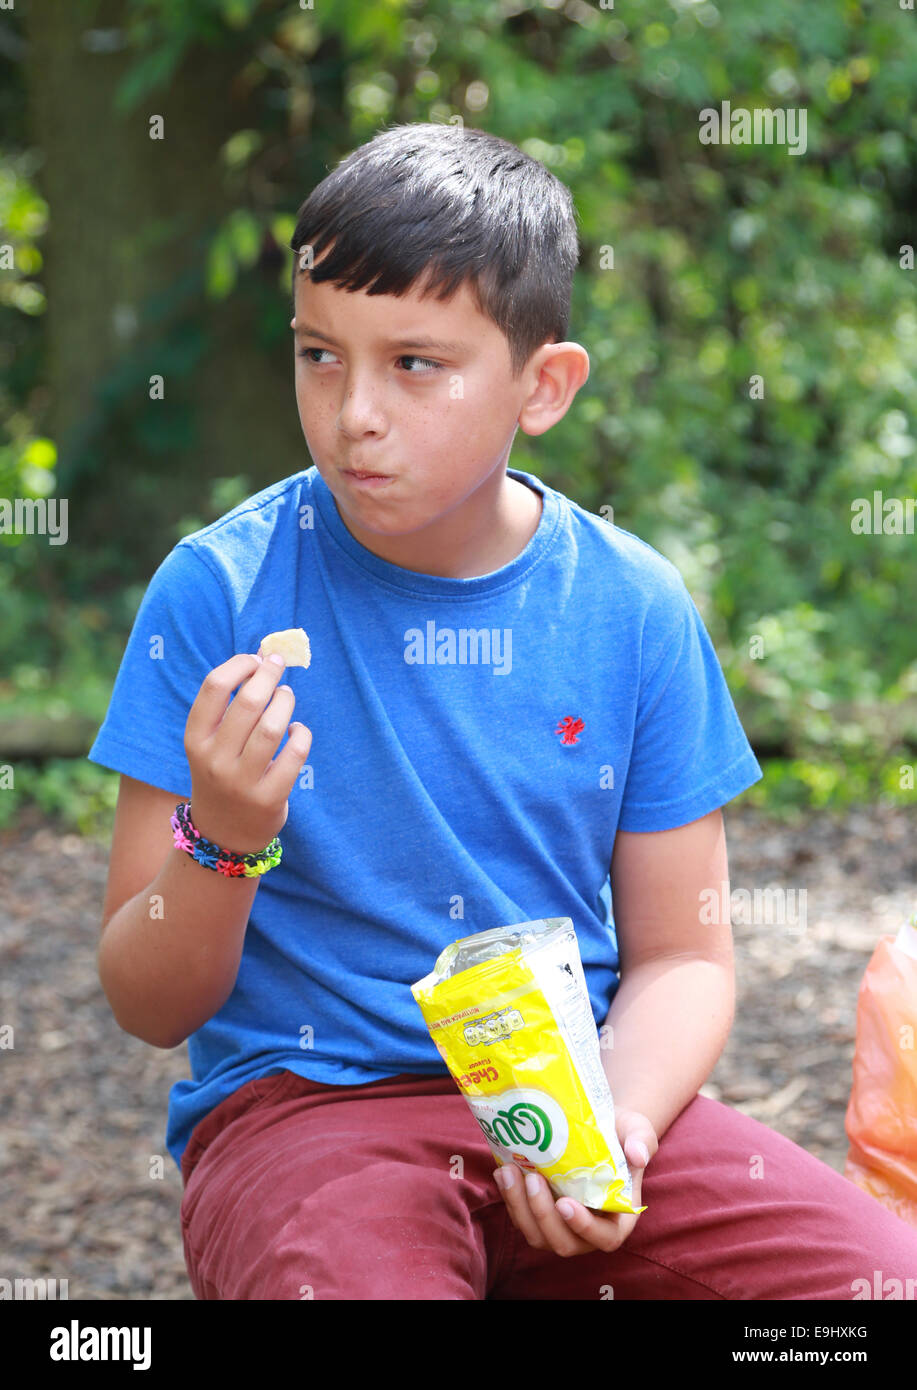 Boy eating a packet of crisps Stock Photo